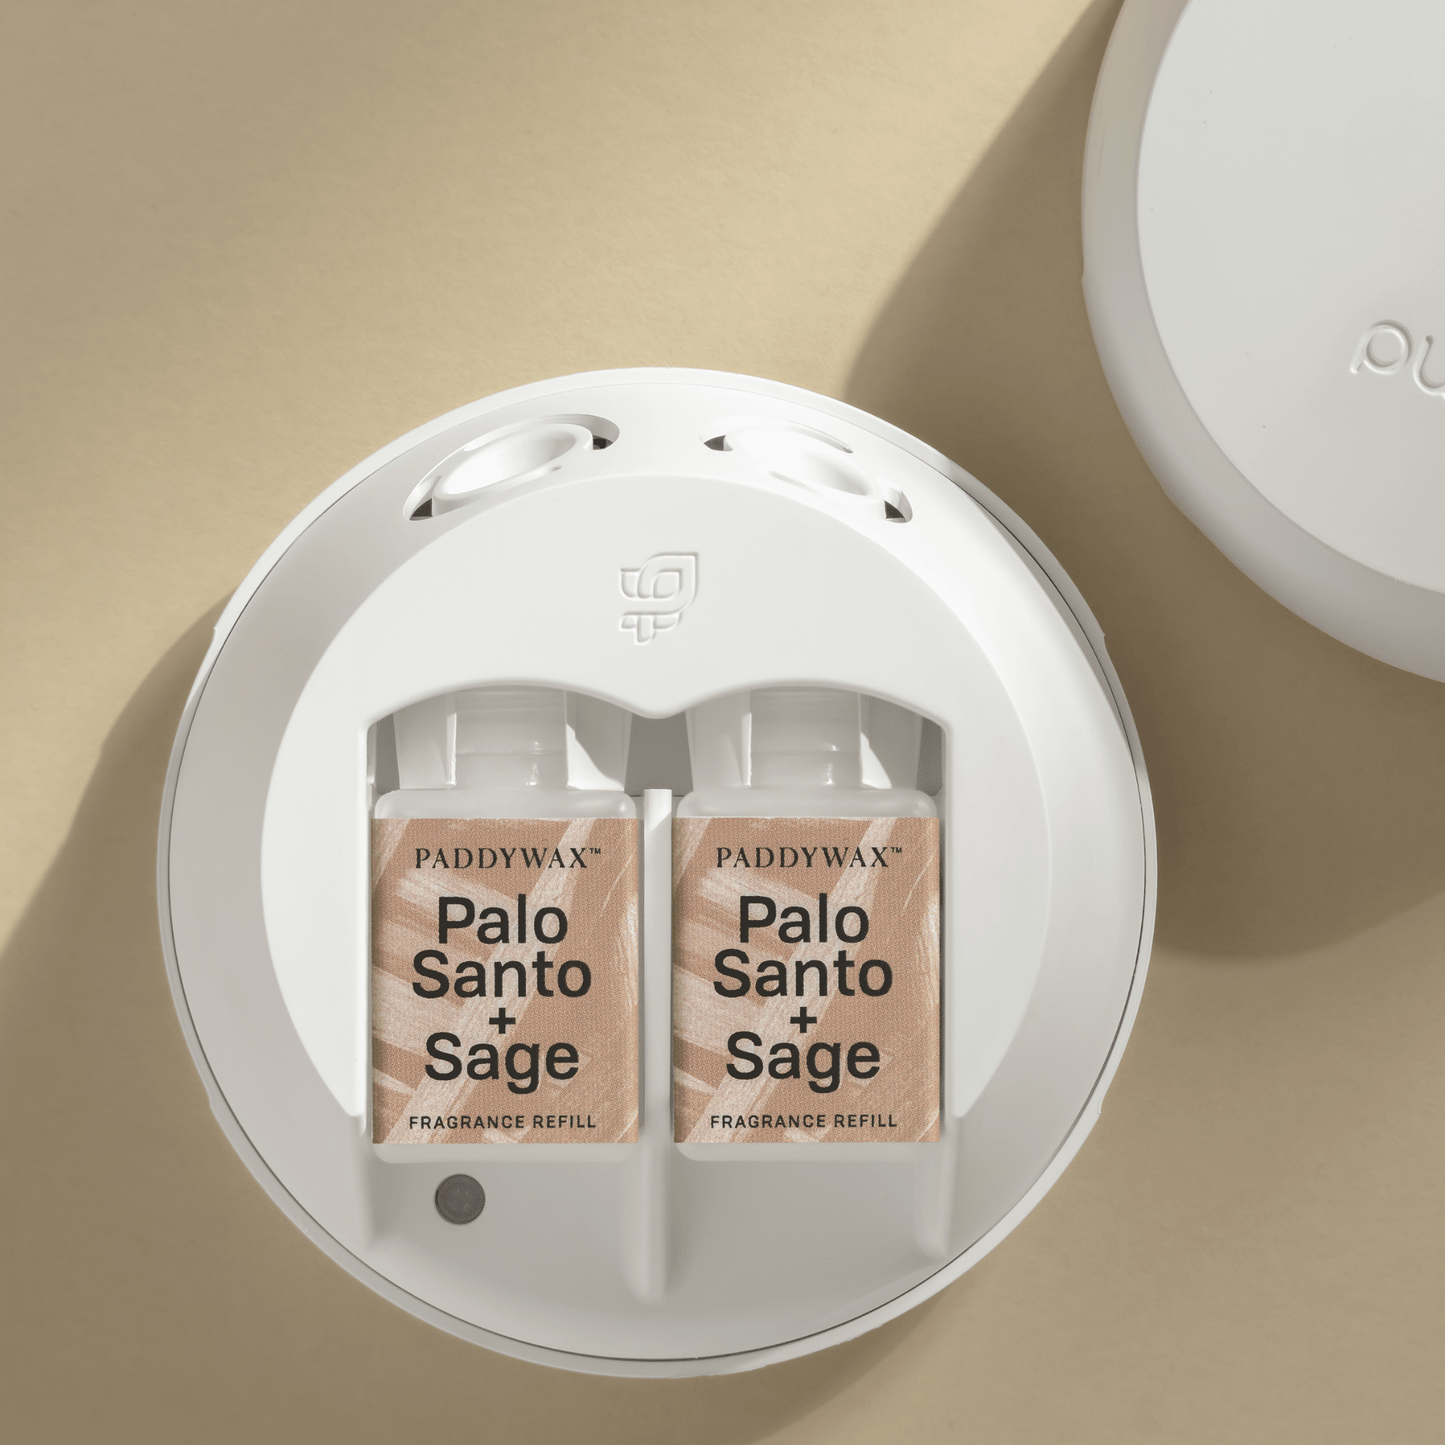 Paddywax Palo Santo + Sage fragrance refills for Pura in a Pura device